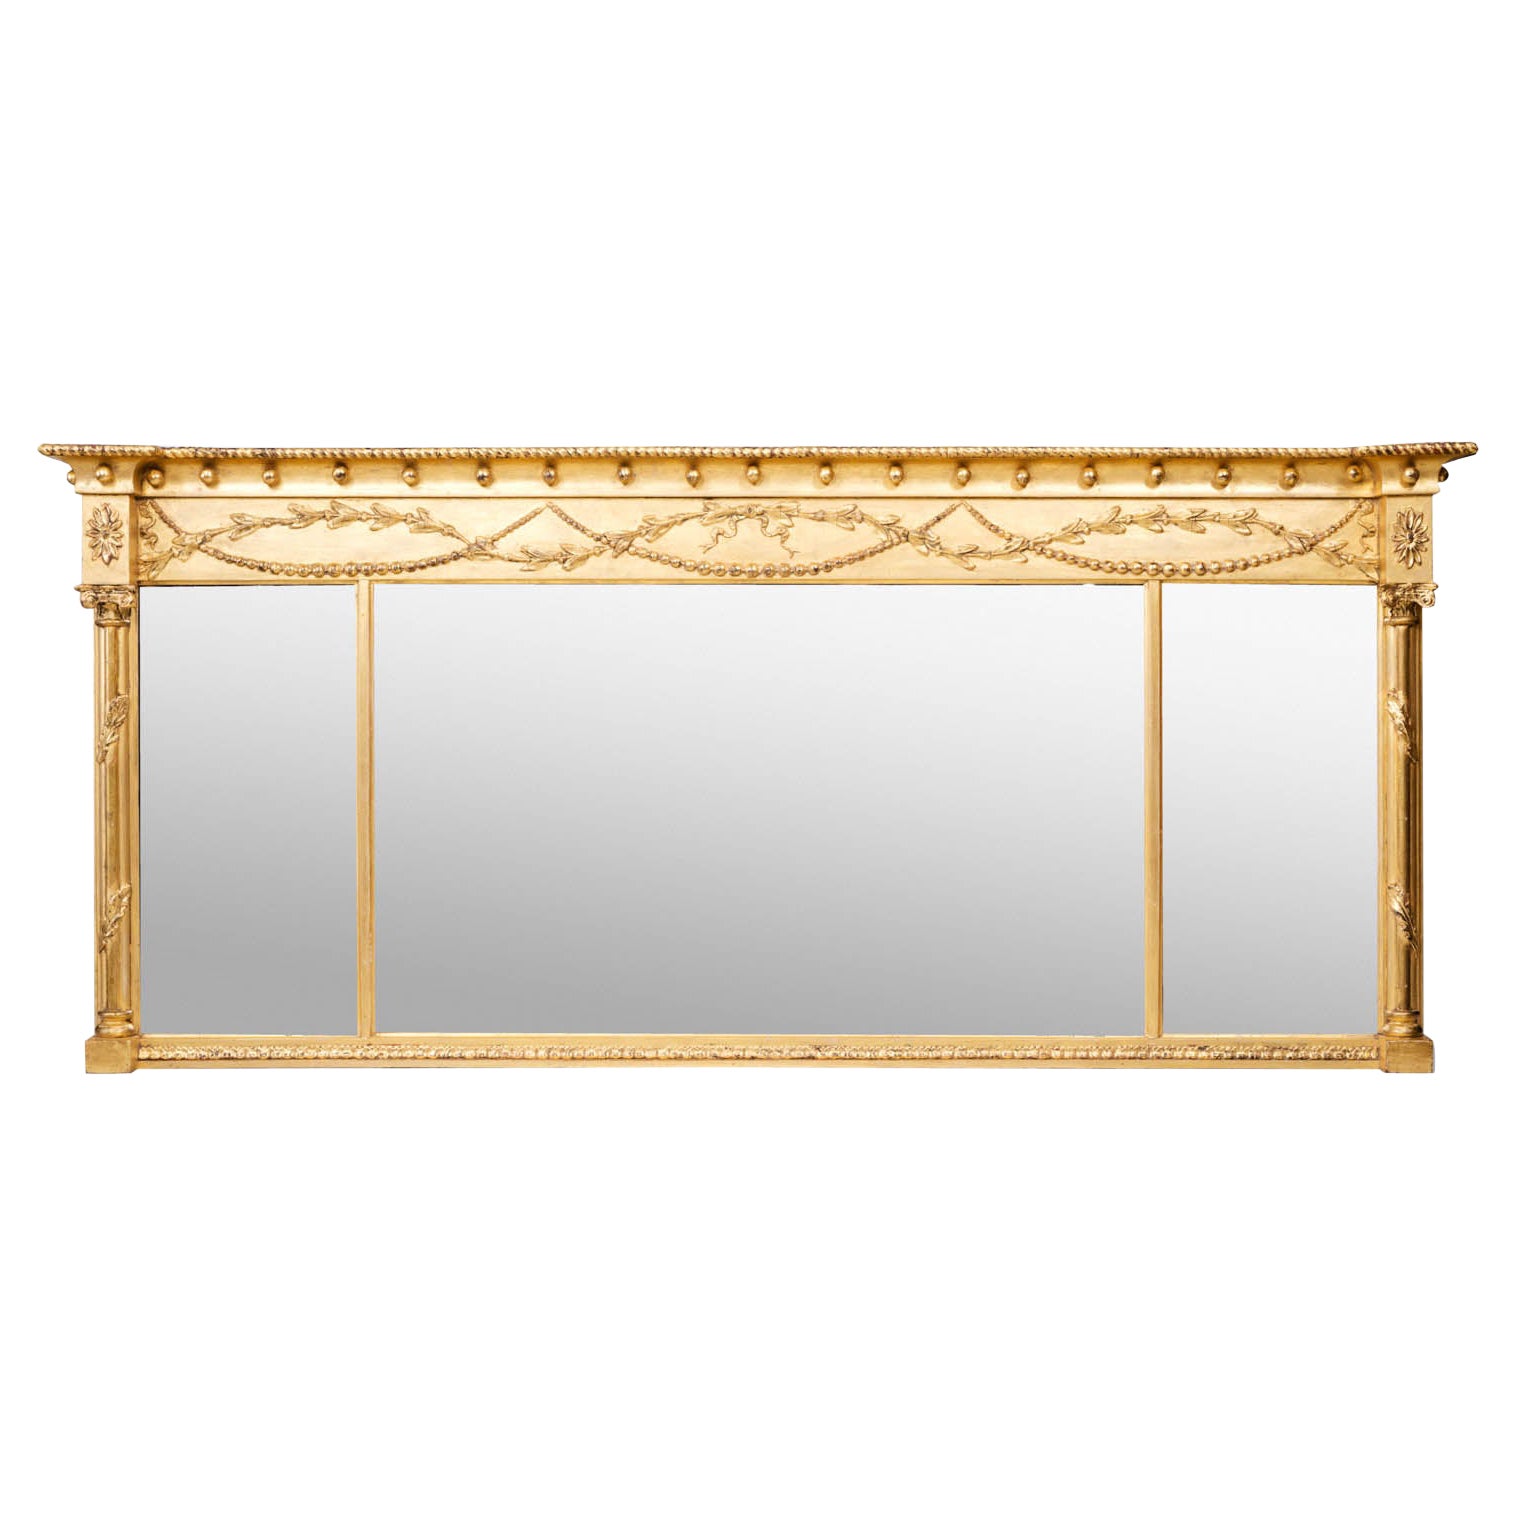 19th Century Regency Gilt Compartmental Overmantel Mirror For Sale